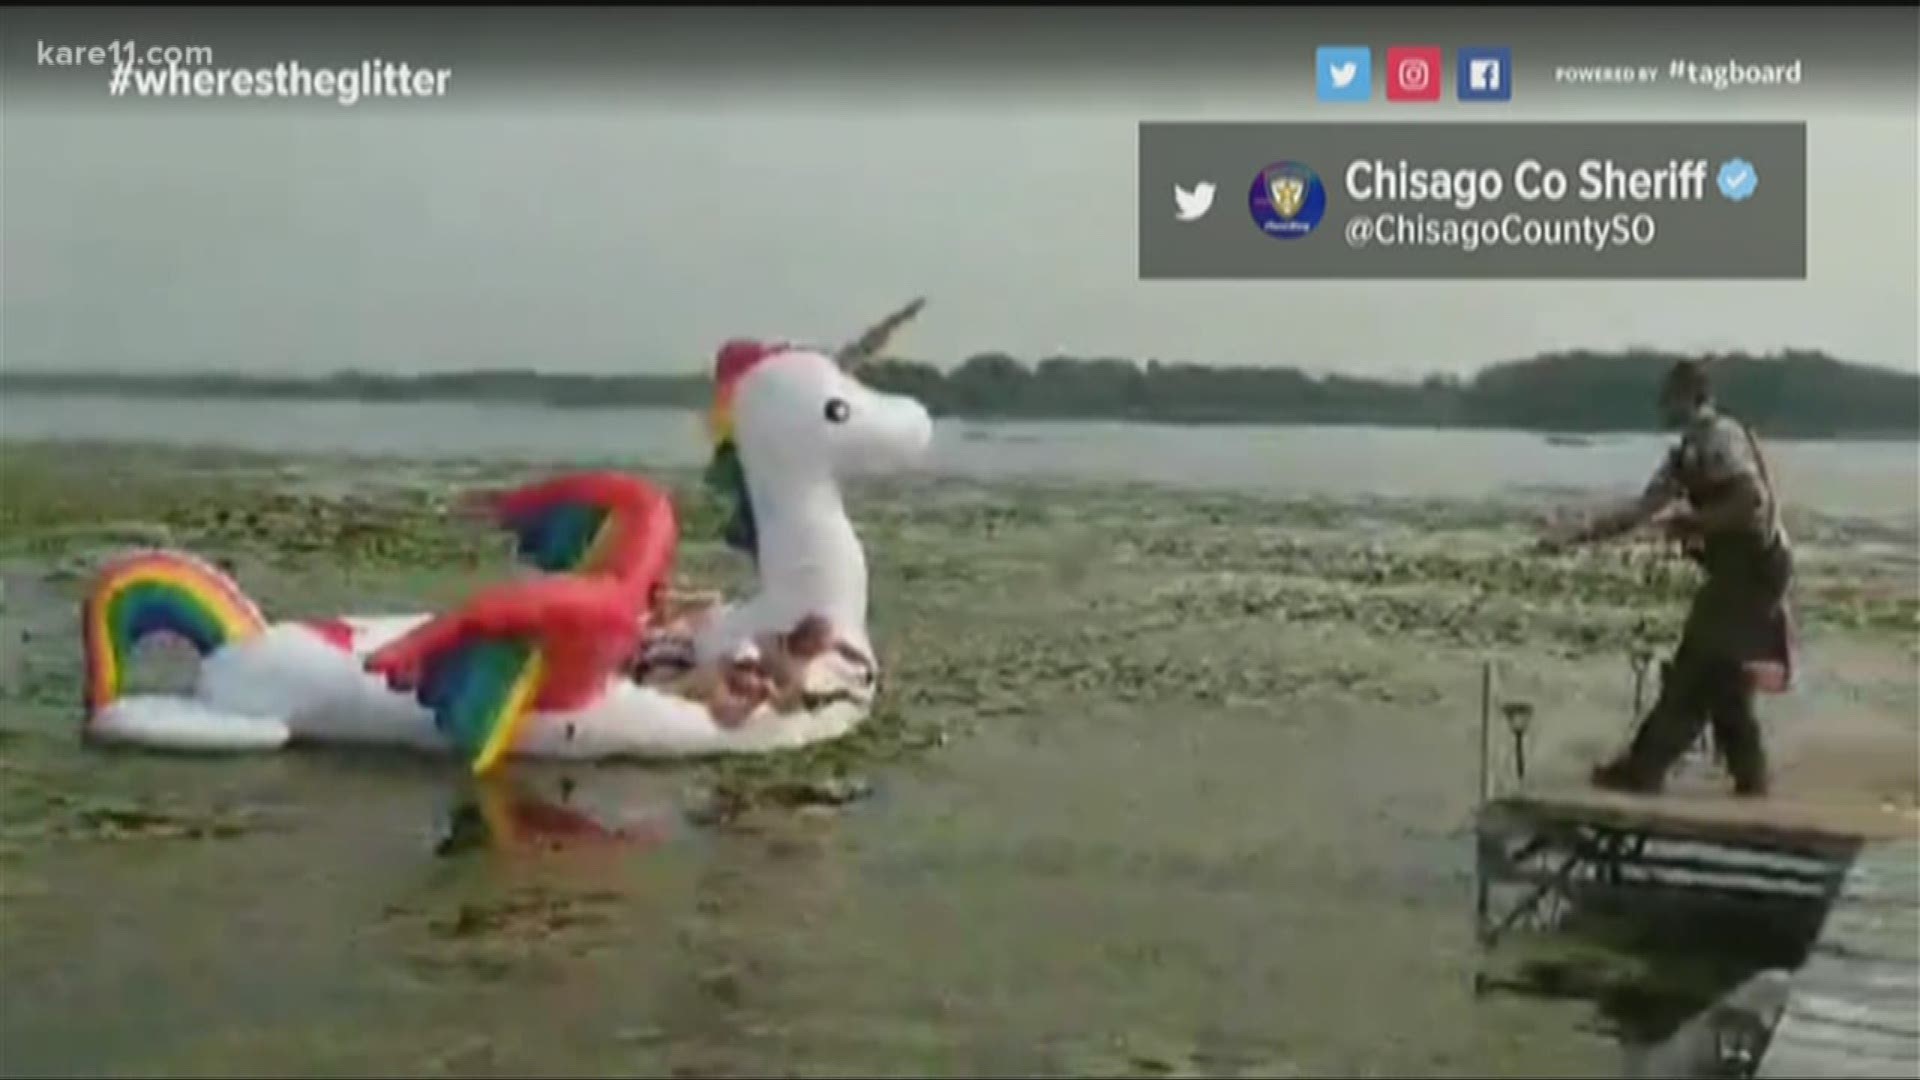 A group of women in an inflatable unicorn were rescued from the weeds.